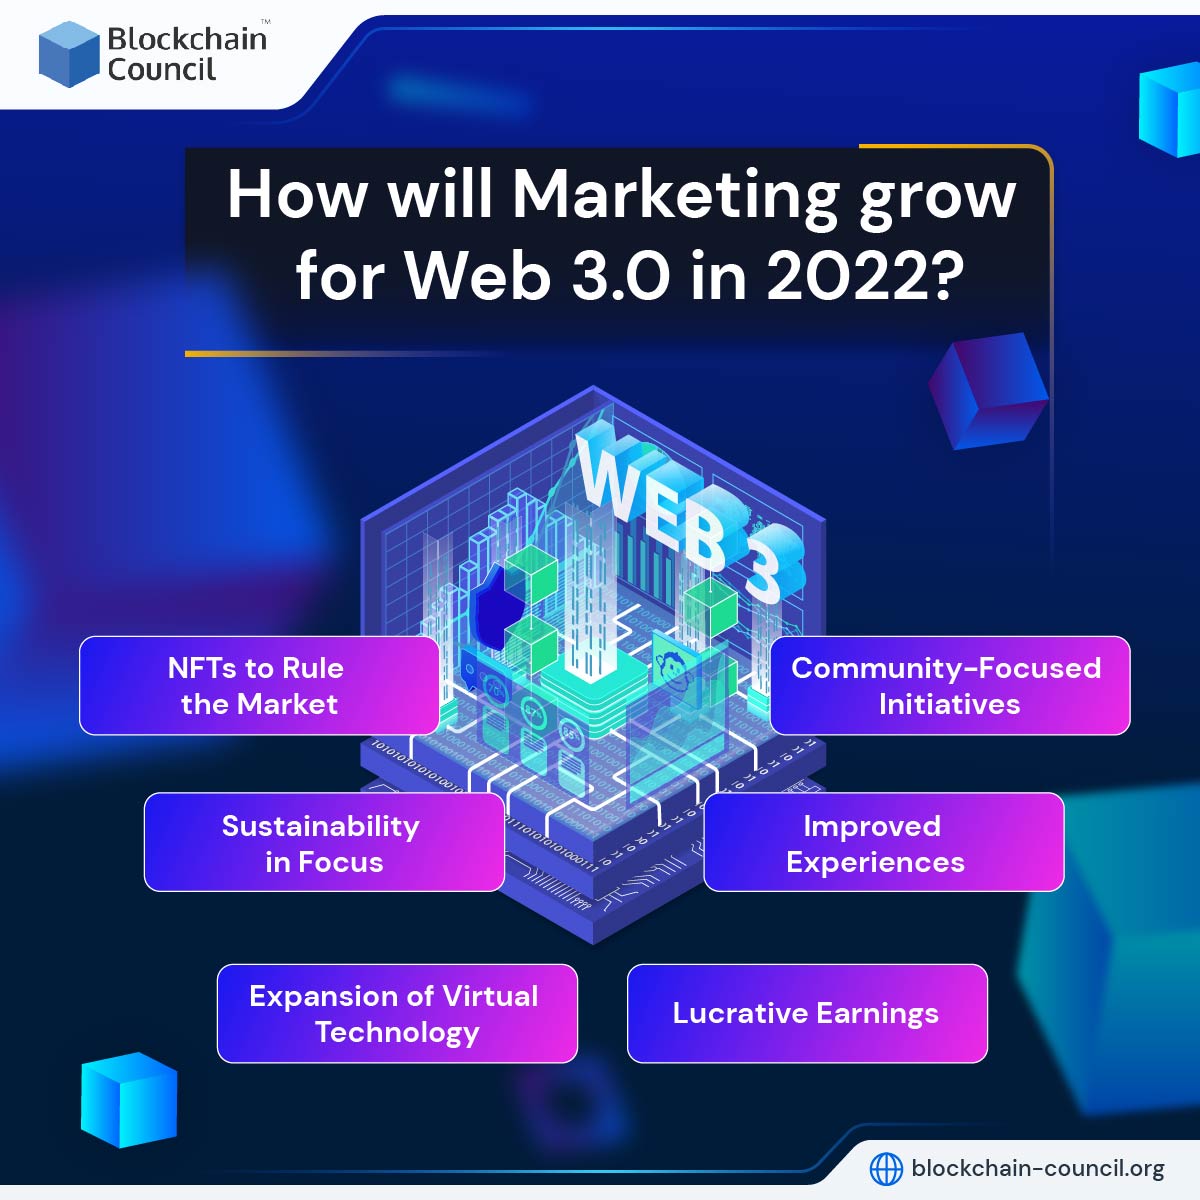 How will Marketing grow for Web 3.0 in 2022